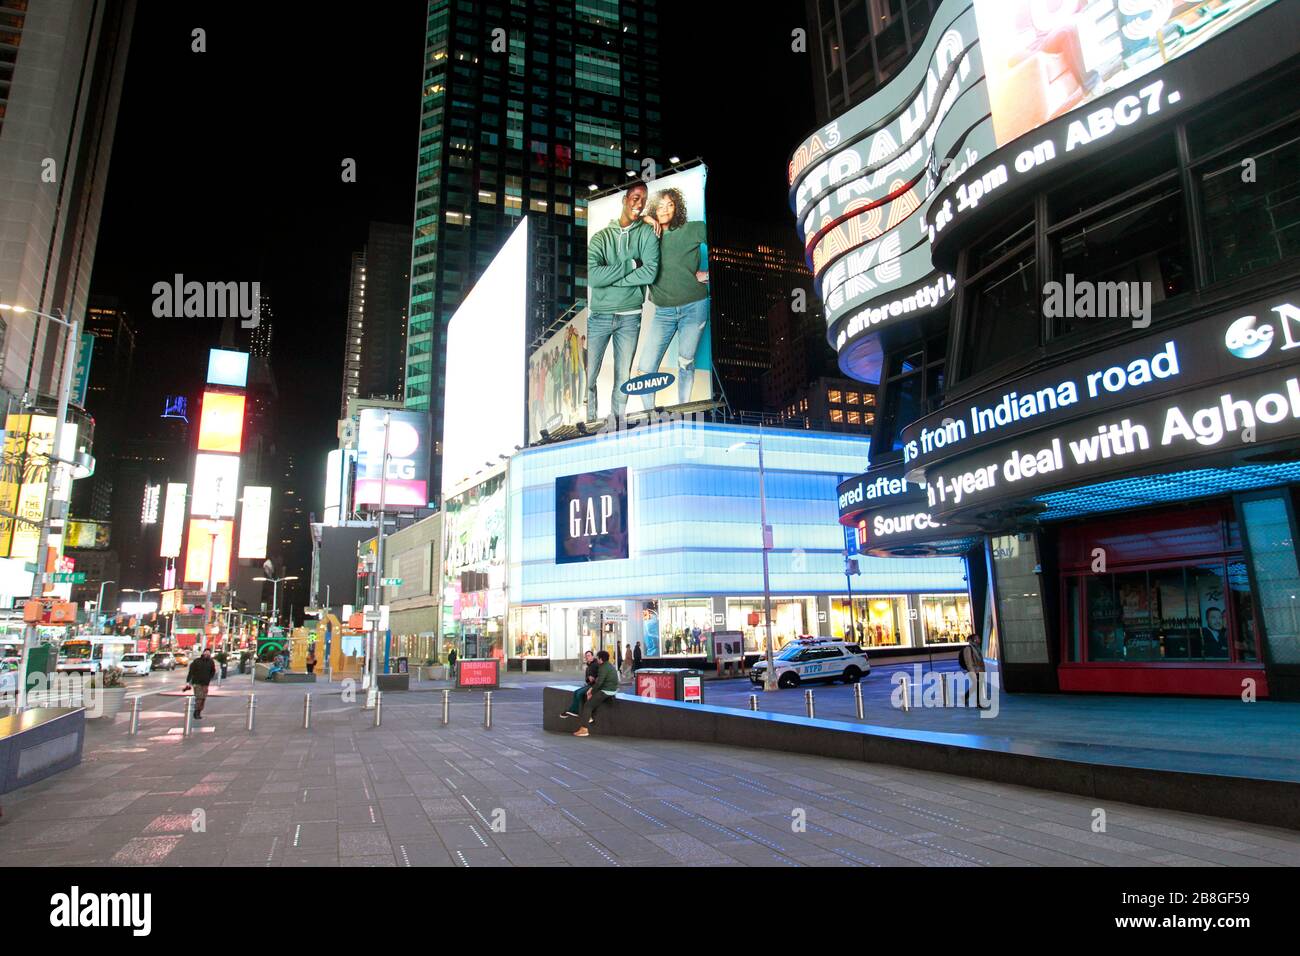 New York City, New York, United States. 21st Mar, 2020. Times Square in New York City on Saturday evening, March 21st, 2020 is largely devoid of people as New Yorker's heeded warning to stay at home in light of the coronavirus pandemic. Credit: Adam Stoltman/Alamy Live News Stock Photo